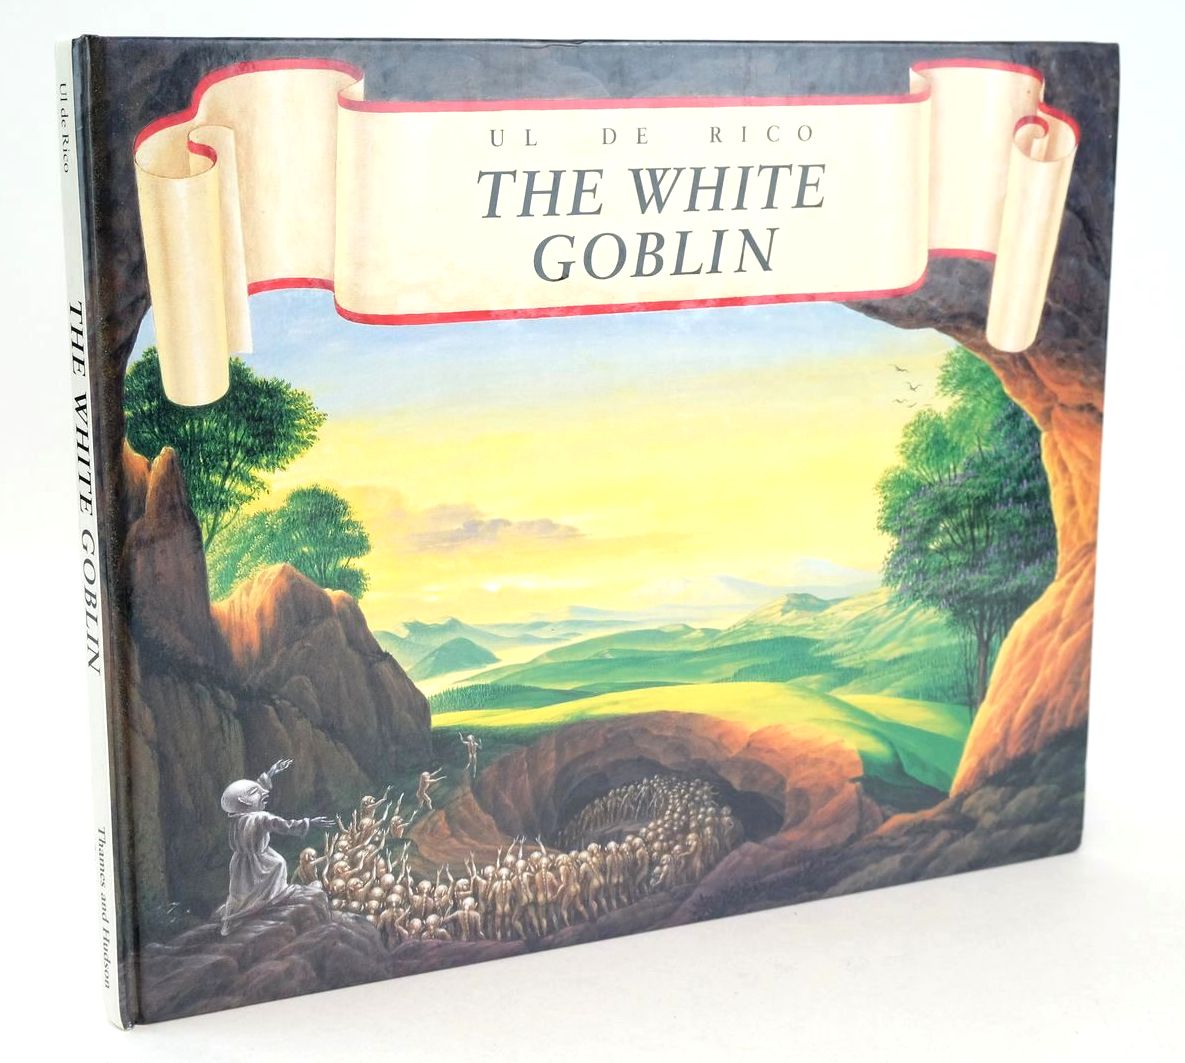 Photo of THE WHITE GOBLIN written by De Rico, Ul illustrated by De Rico, Ul published by Thames and Hudson (STOCK CODE: 1326101)  for sale by Stella & Rose's Books